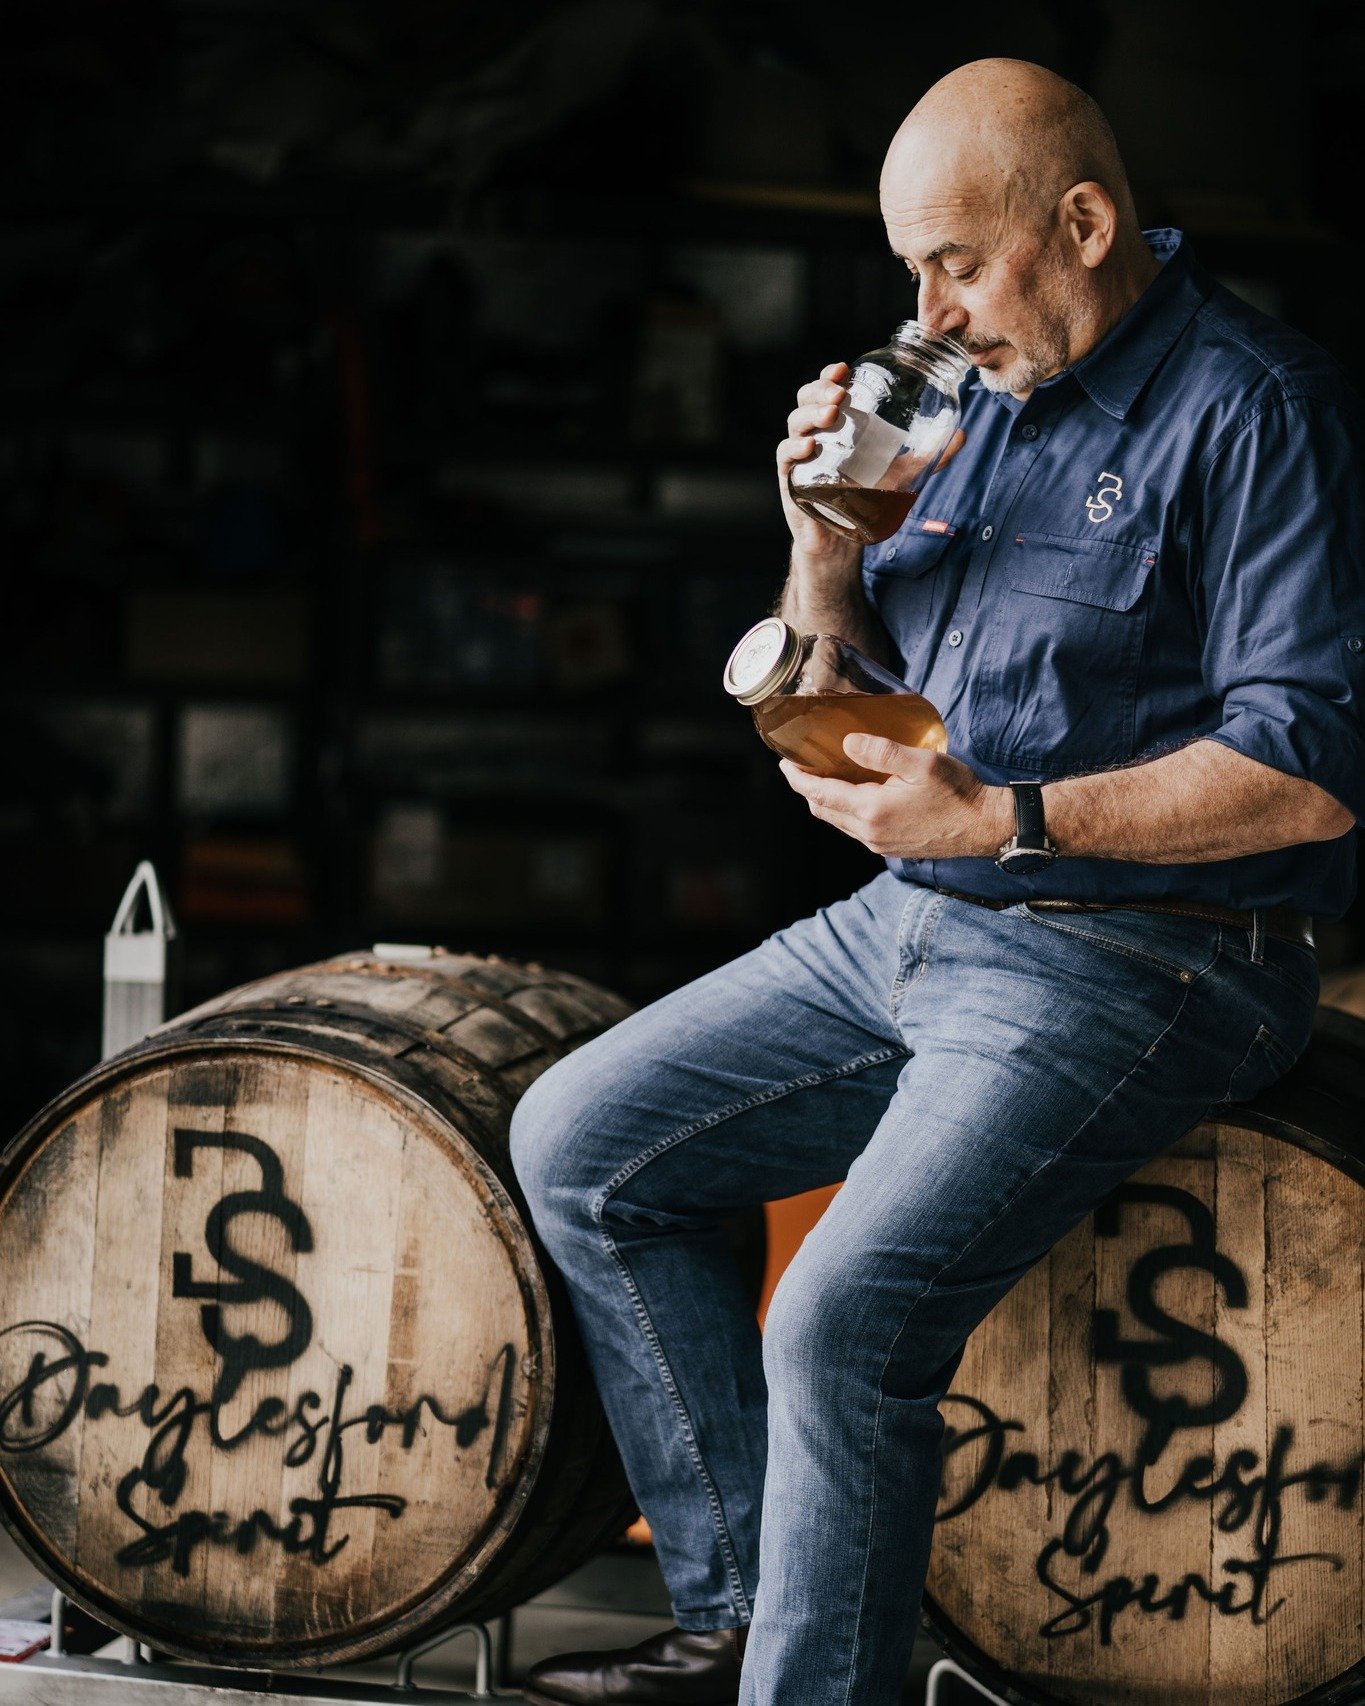 You might remember @daylesford.spirit distillery from our Winter '23 edition 🥃

Well, they've been quite busy! Their range has expanded to include some special limited-release gins, such as the delightful Barrell Aged Shiraz Gin, and their highly an